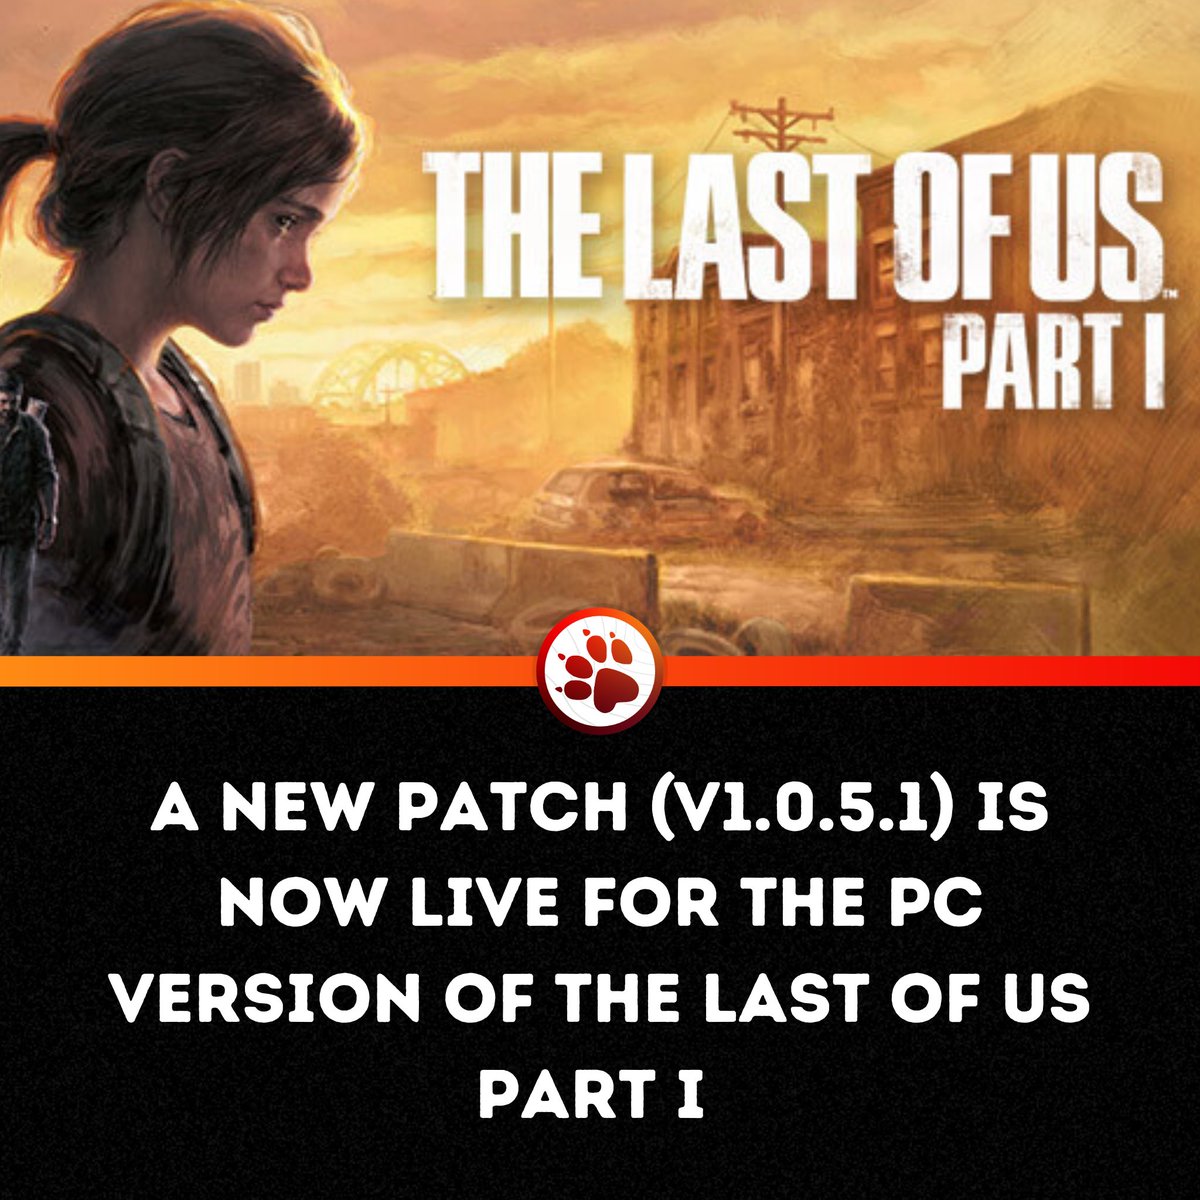 Naughty Dog has revealed that a new patch (v1.0.5.1) is now live for the PC version of #TheLastofUsPartI and it includes the following fixes;

• General stability improvements
• Fixed a crash on boot impacting all Intel Arc GPUs
• Stability improvements for some AMD GPUs…